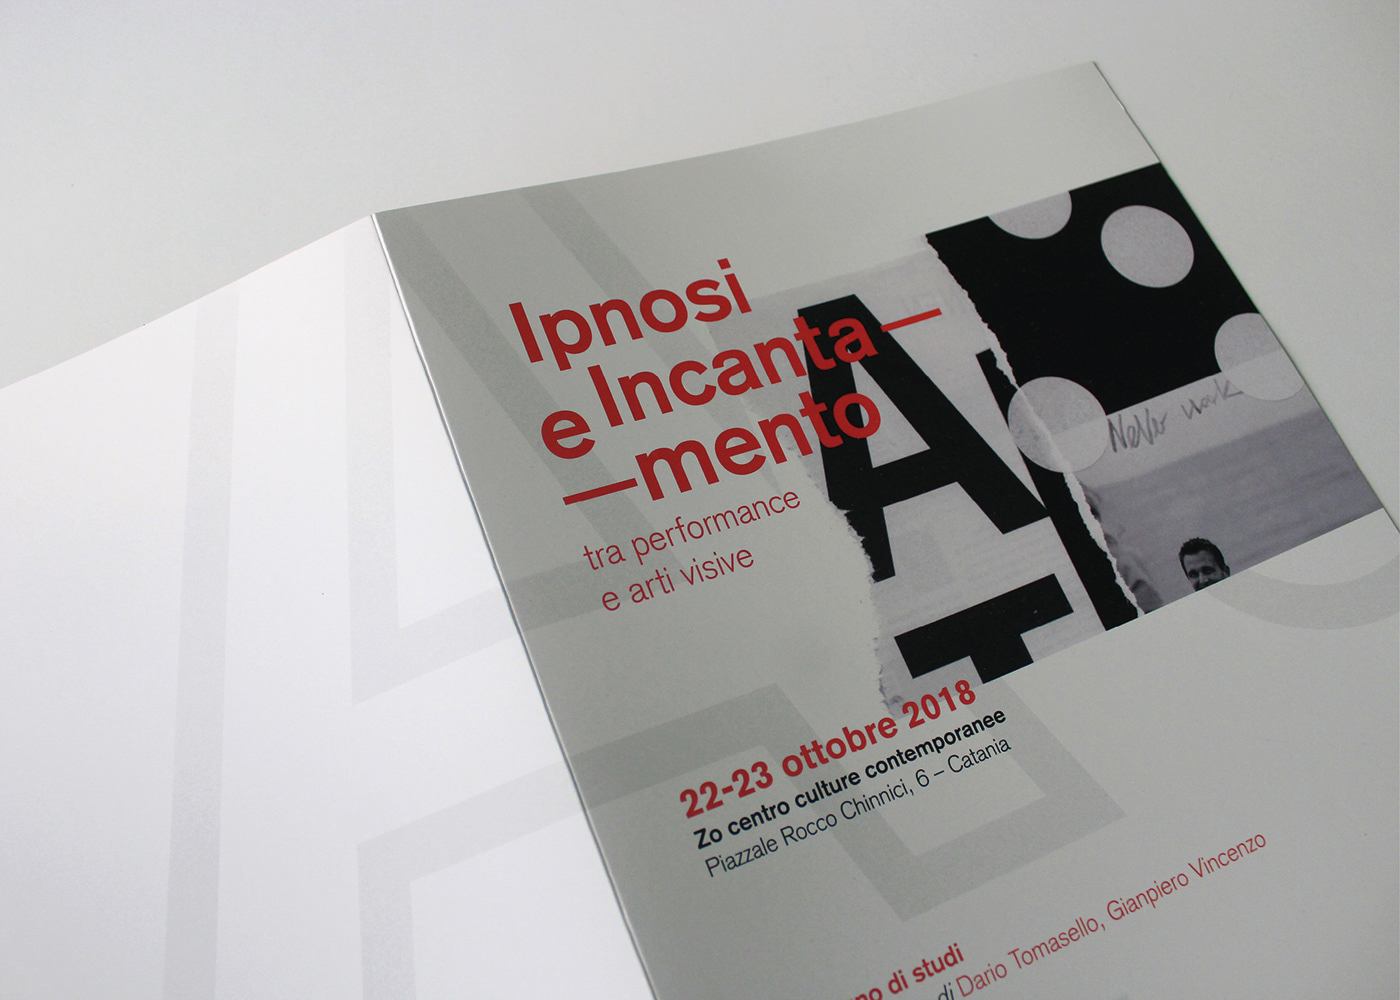 graphic design  Event typography   InDesign Behance posters Layout visual identities adobeawards